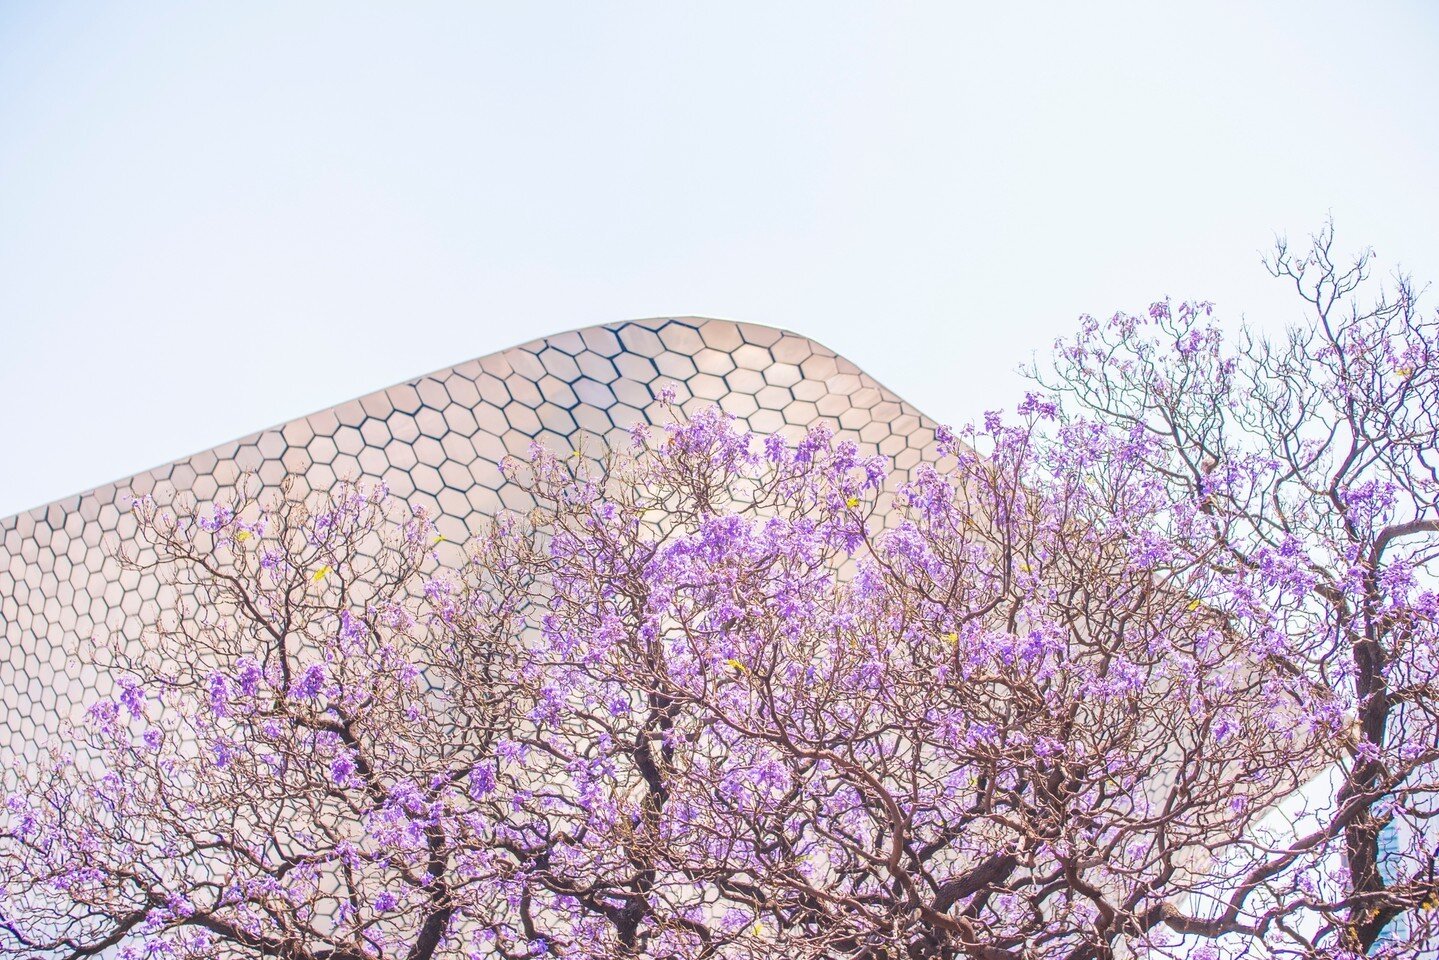 Come spring, Mexico City is awash in lavender. Writer Liam Greenwell tells us of the phenomenon and how it came to be, guiding us through the city via Jacaranda-lined streets. 

You&rsquo;ve never seen Mexico City like this before &mdash; just tap th